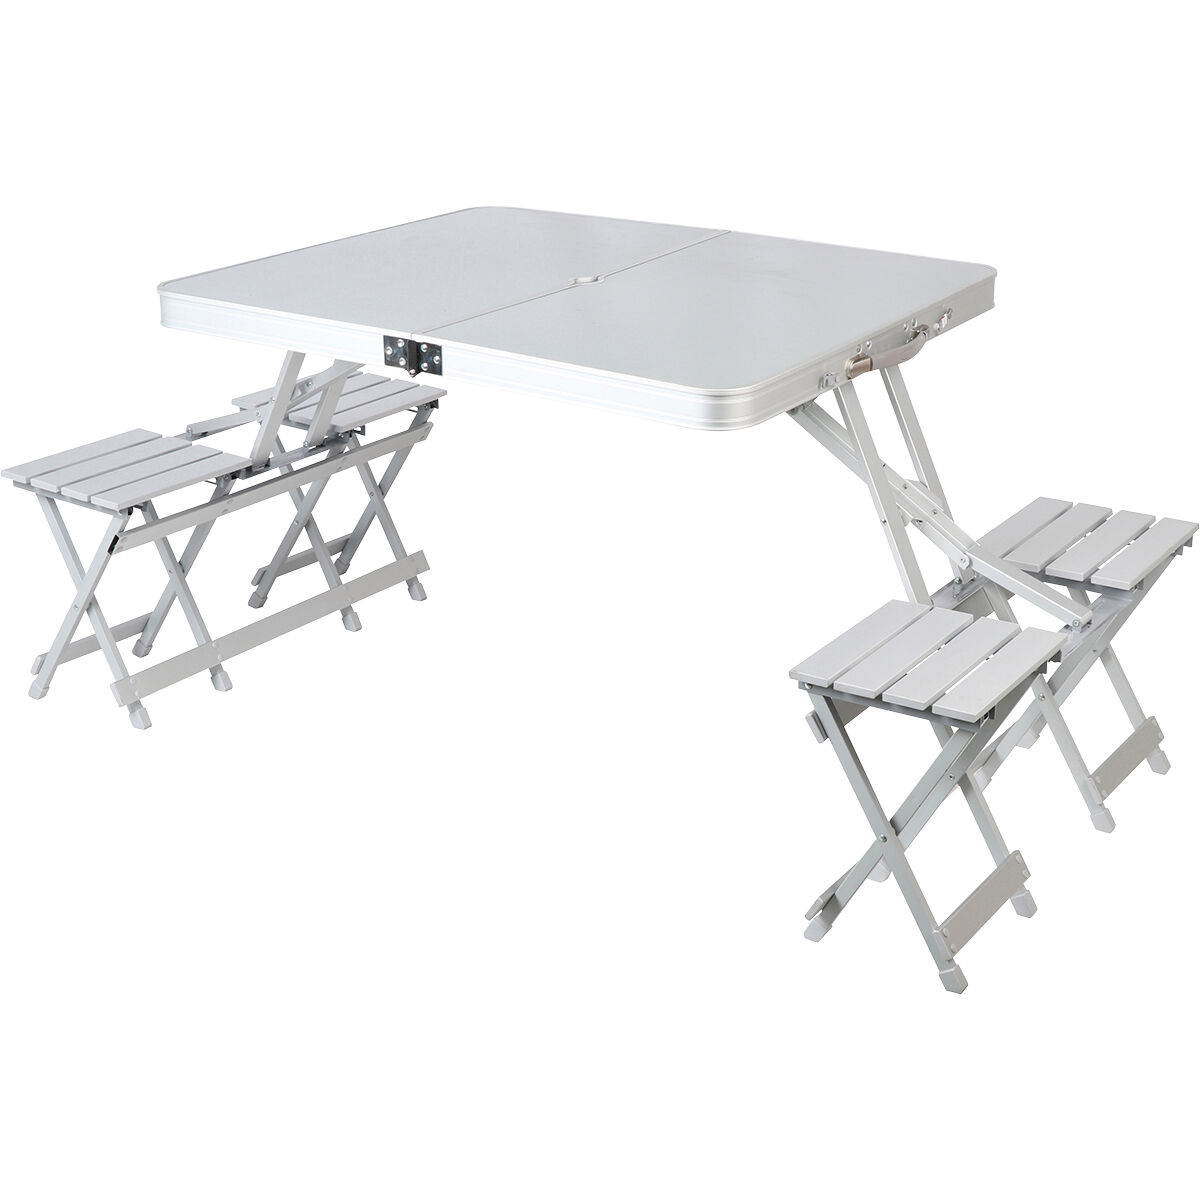 Outdoor Folding Table and Chairs Portable Table and Four Chair Sets Wild Picnic Table Chairs